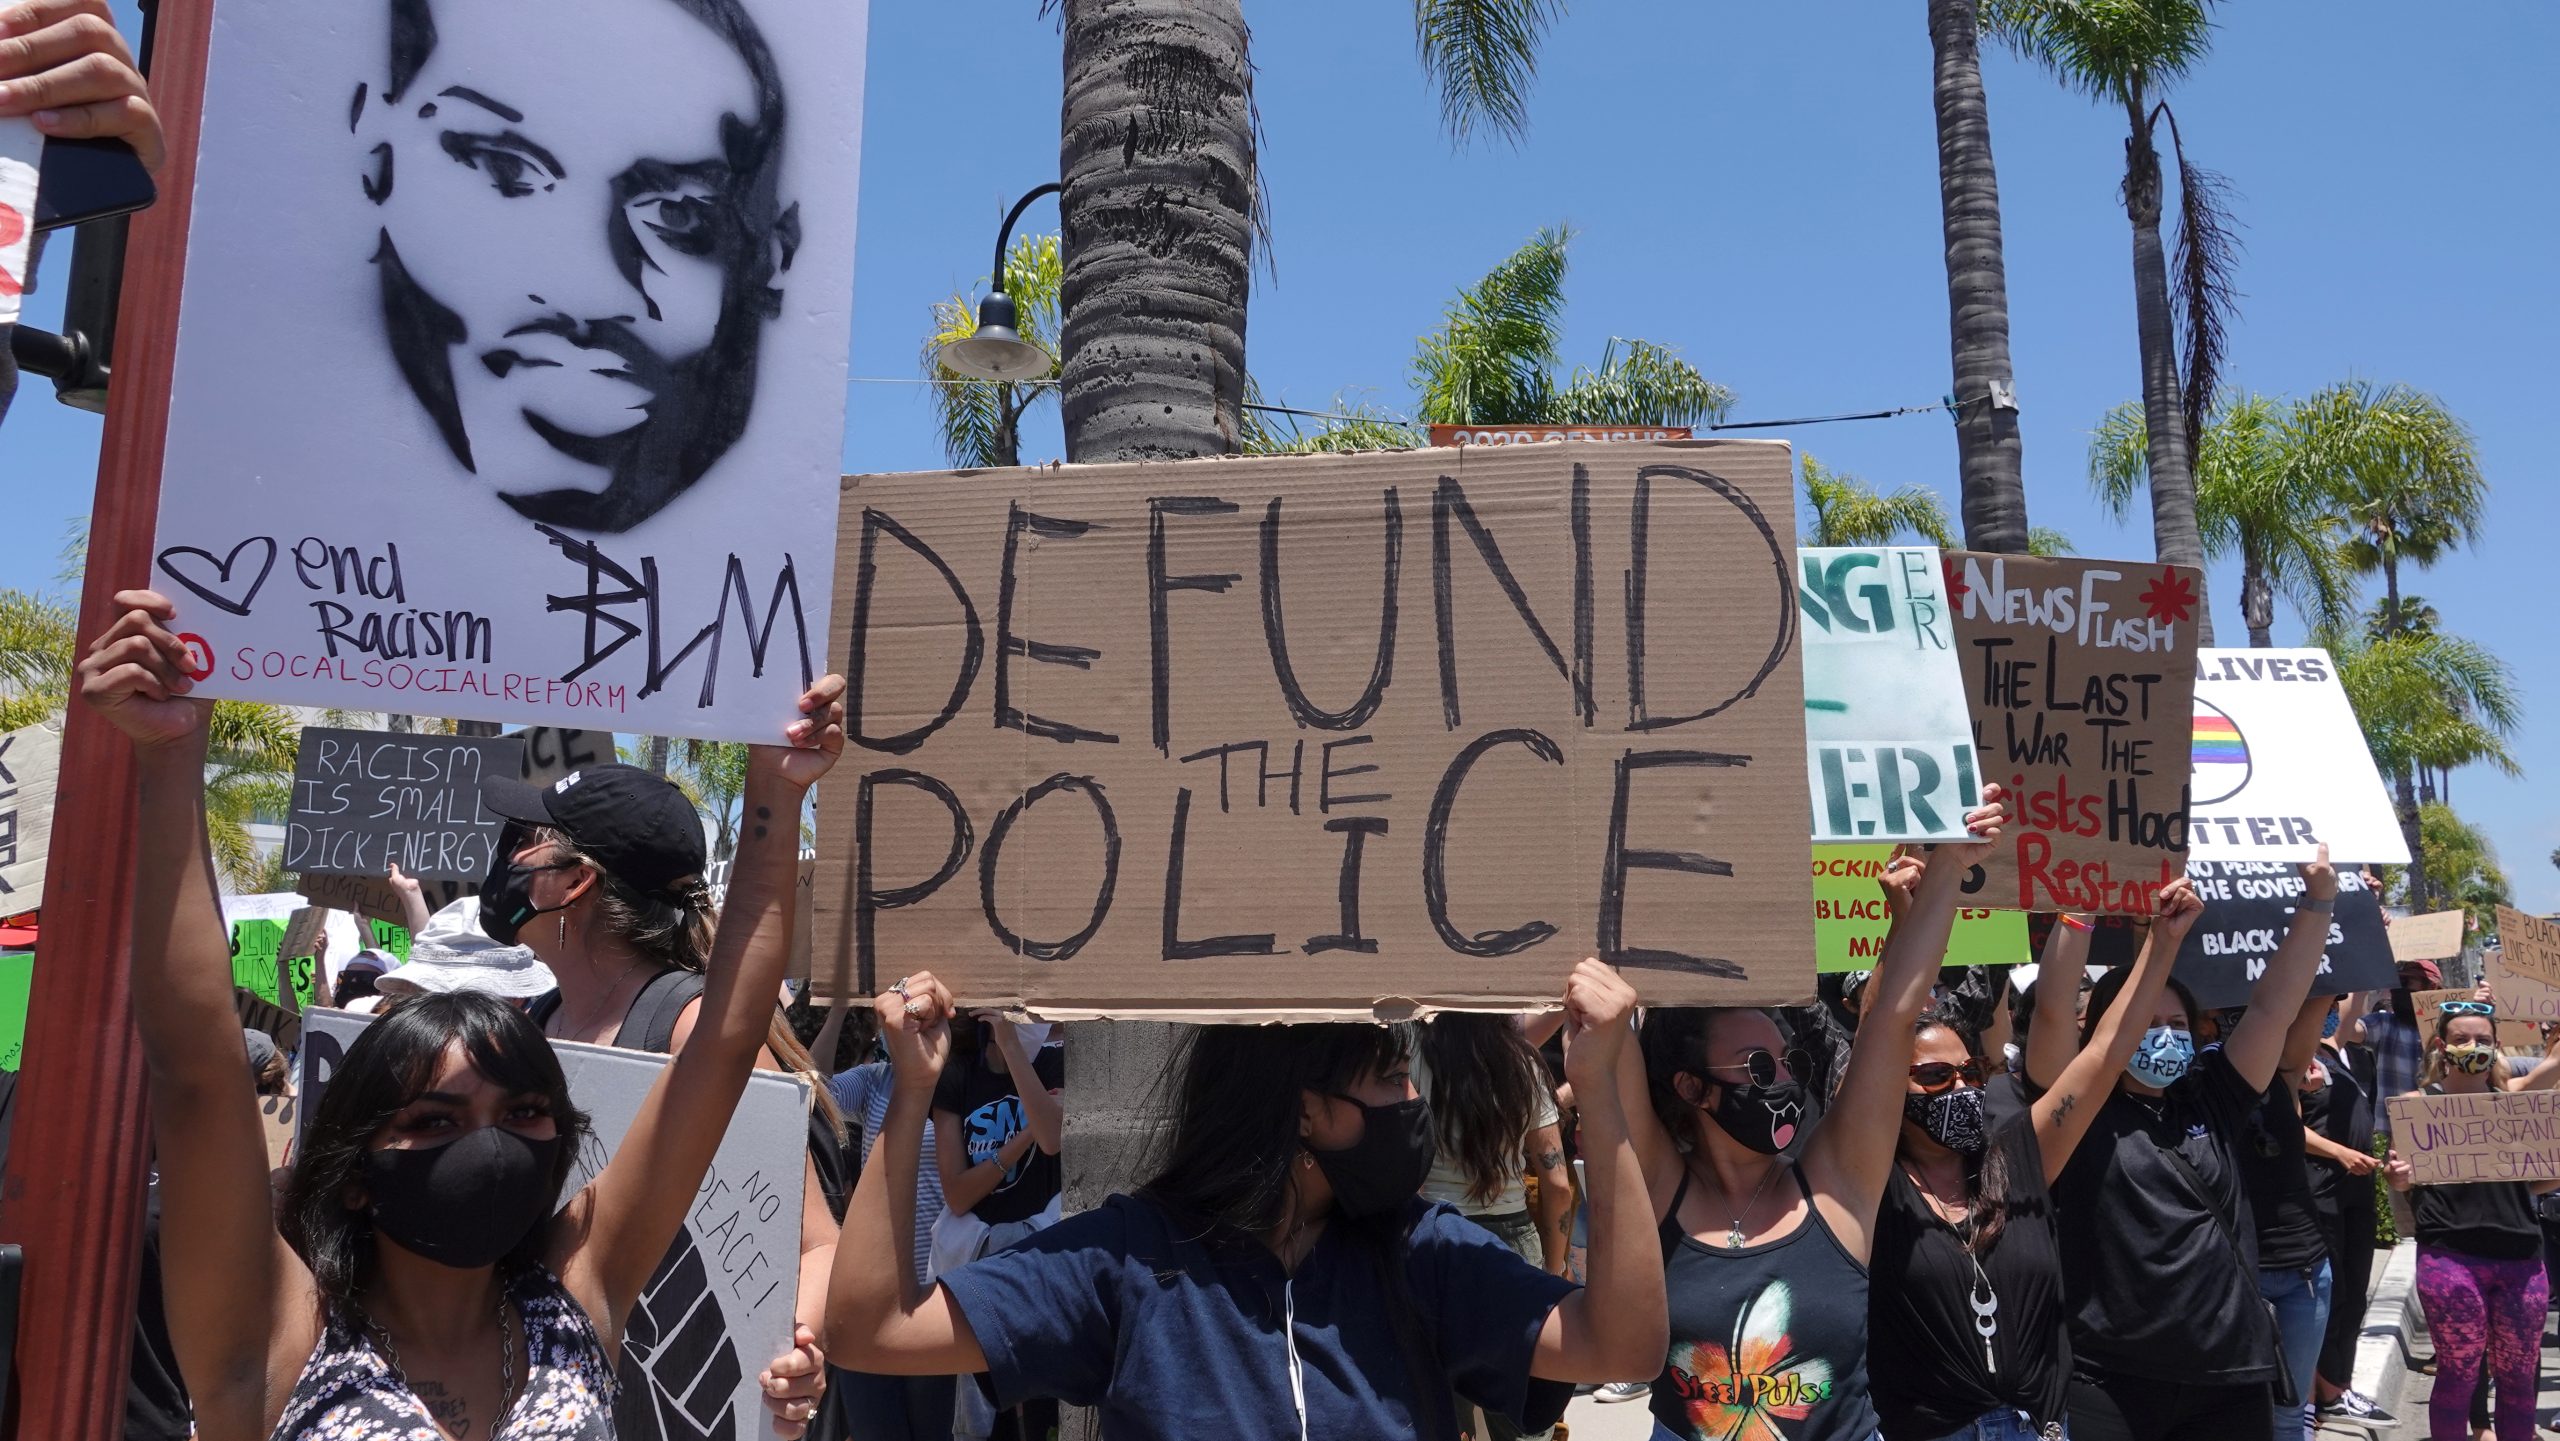 Photo of people at rally holding cardboard sign that says "DEFUND THE POLICE" with a white sign nearby showing a black outline stencil of MLK Jr. and "BLM" written on the bottom.